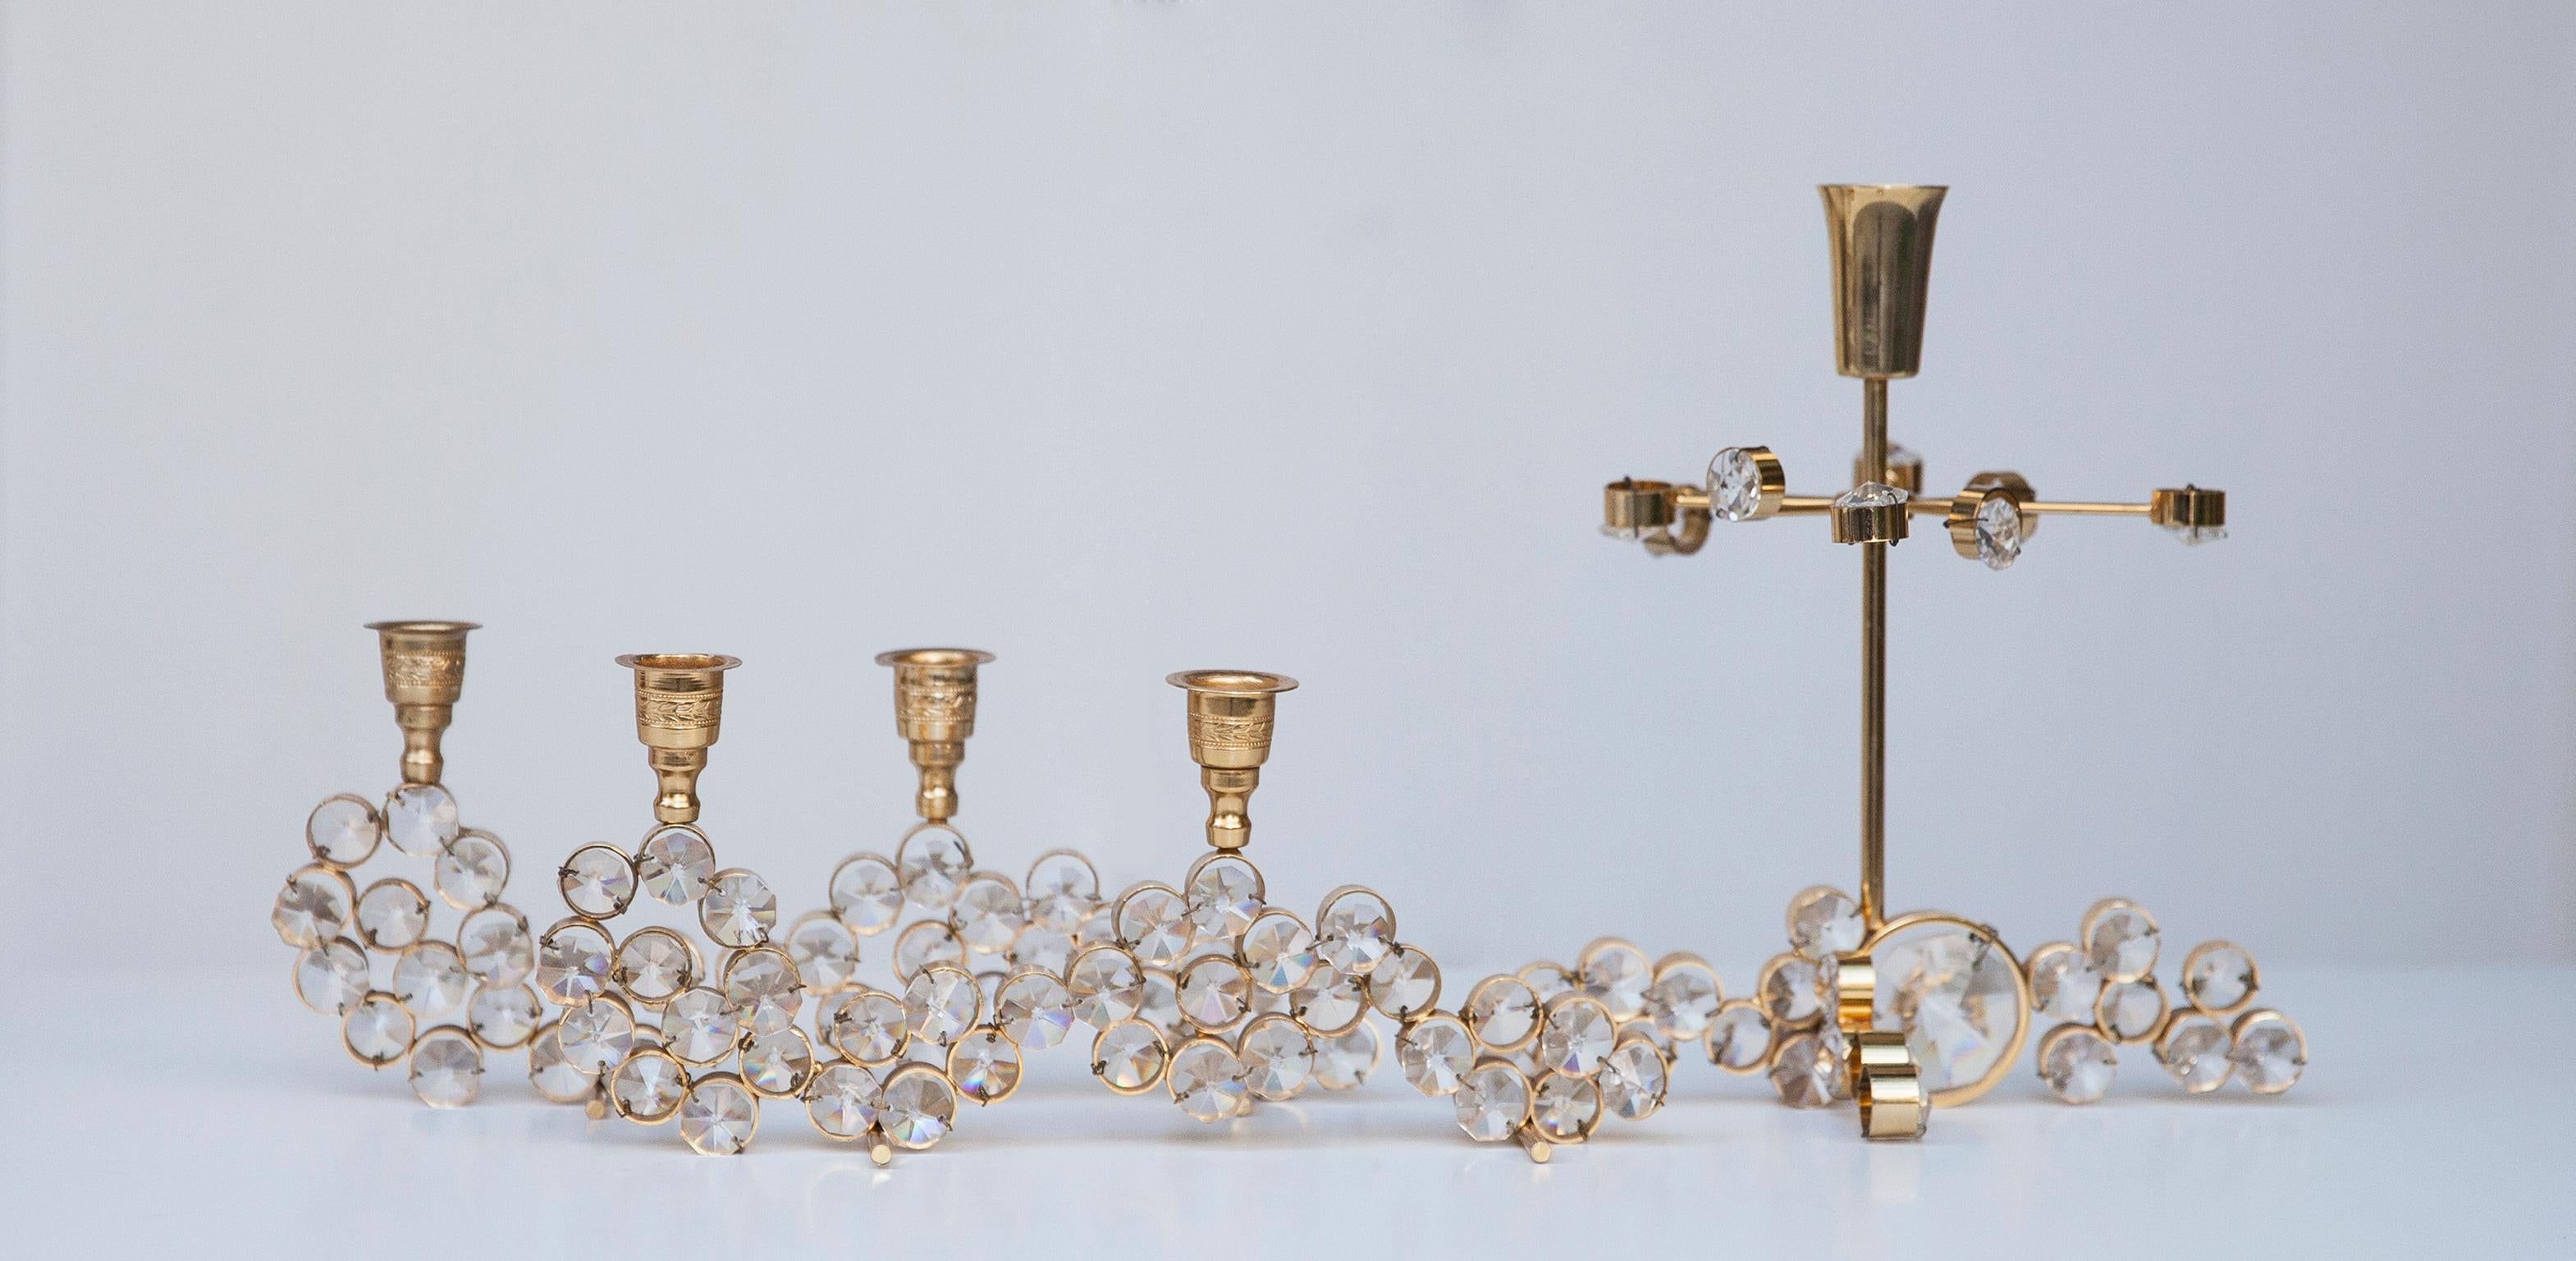 Five beautiful candleholders in the Hollywood Regency style, manufactured in the 1970s by Palwa Germany. Made of gold-plated brass with faceted crystals in excellent vintage condition.

Measures: 23 H x 9 B x 5 D cm

19 H x 18 B x 12 D cm

12